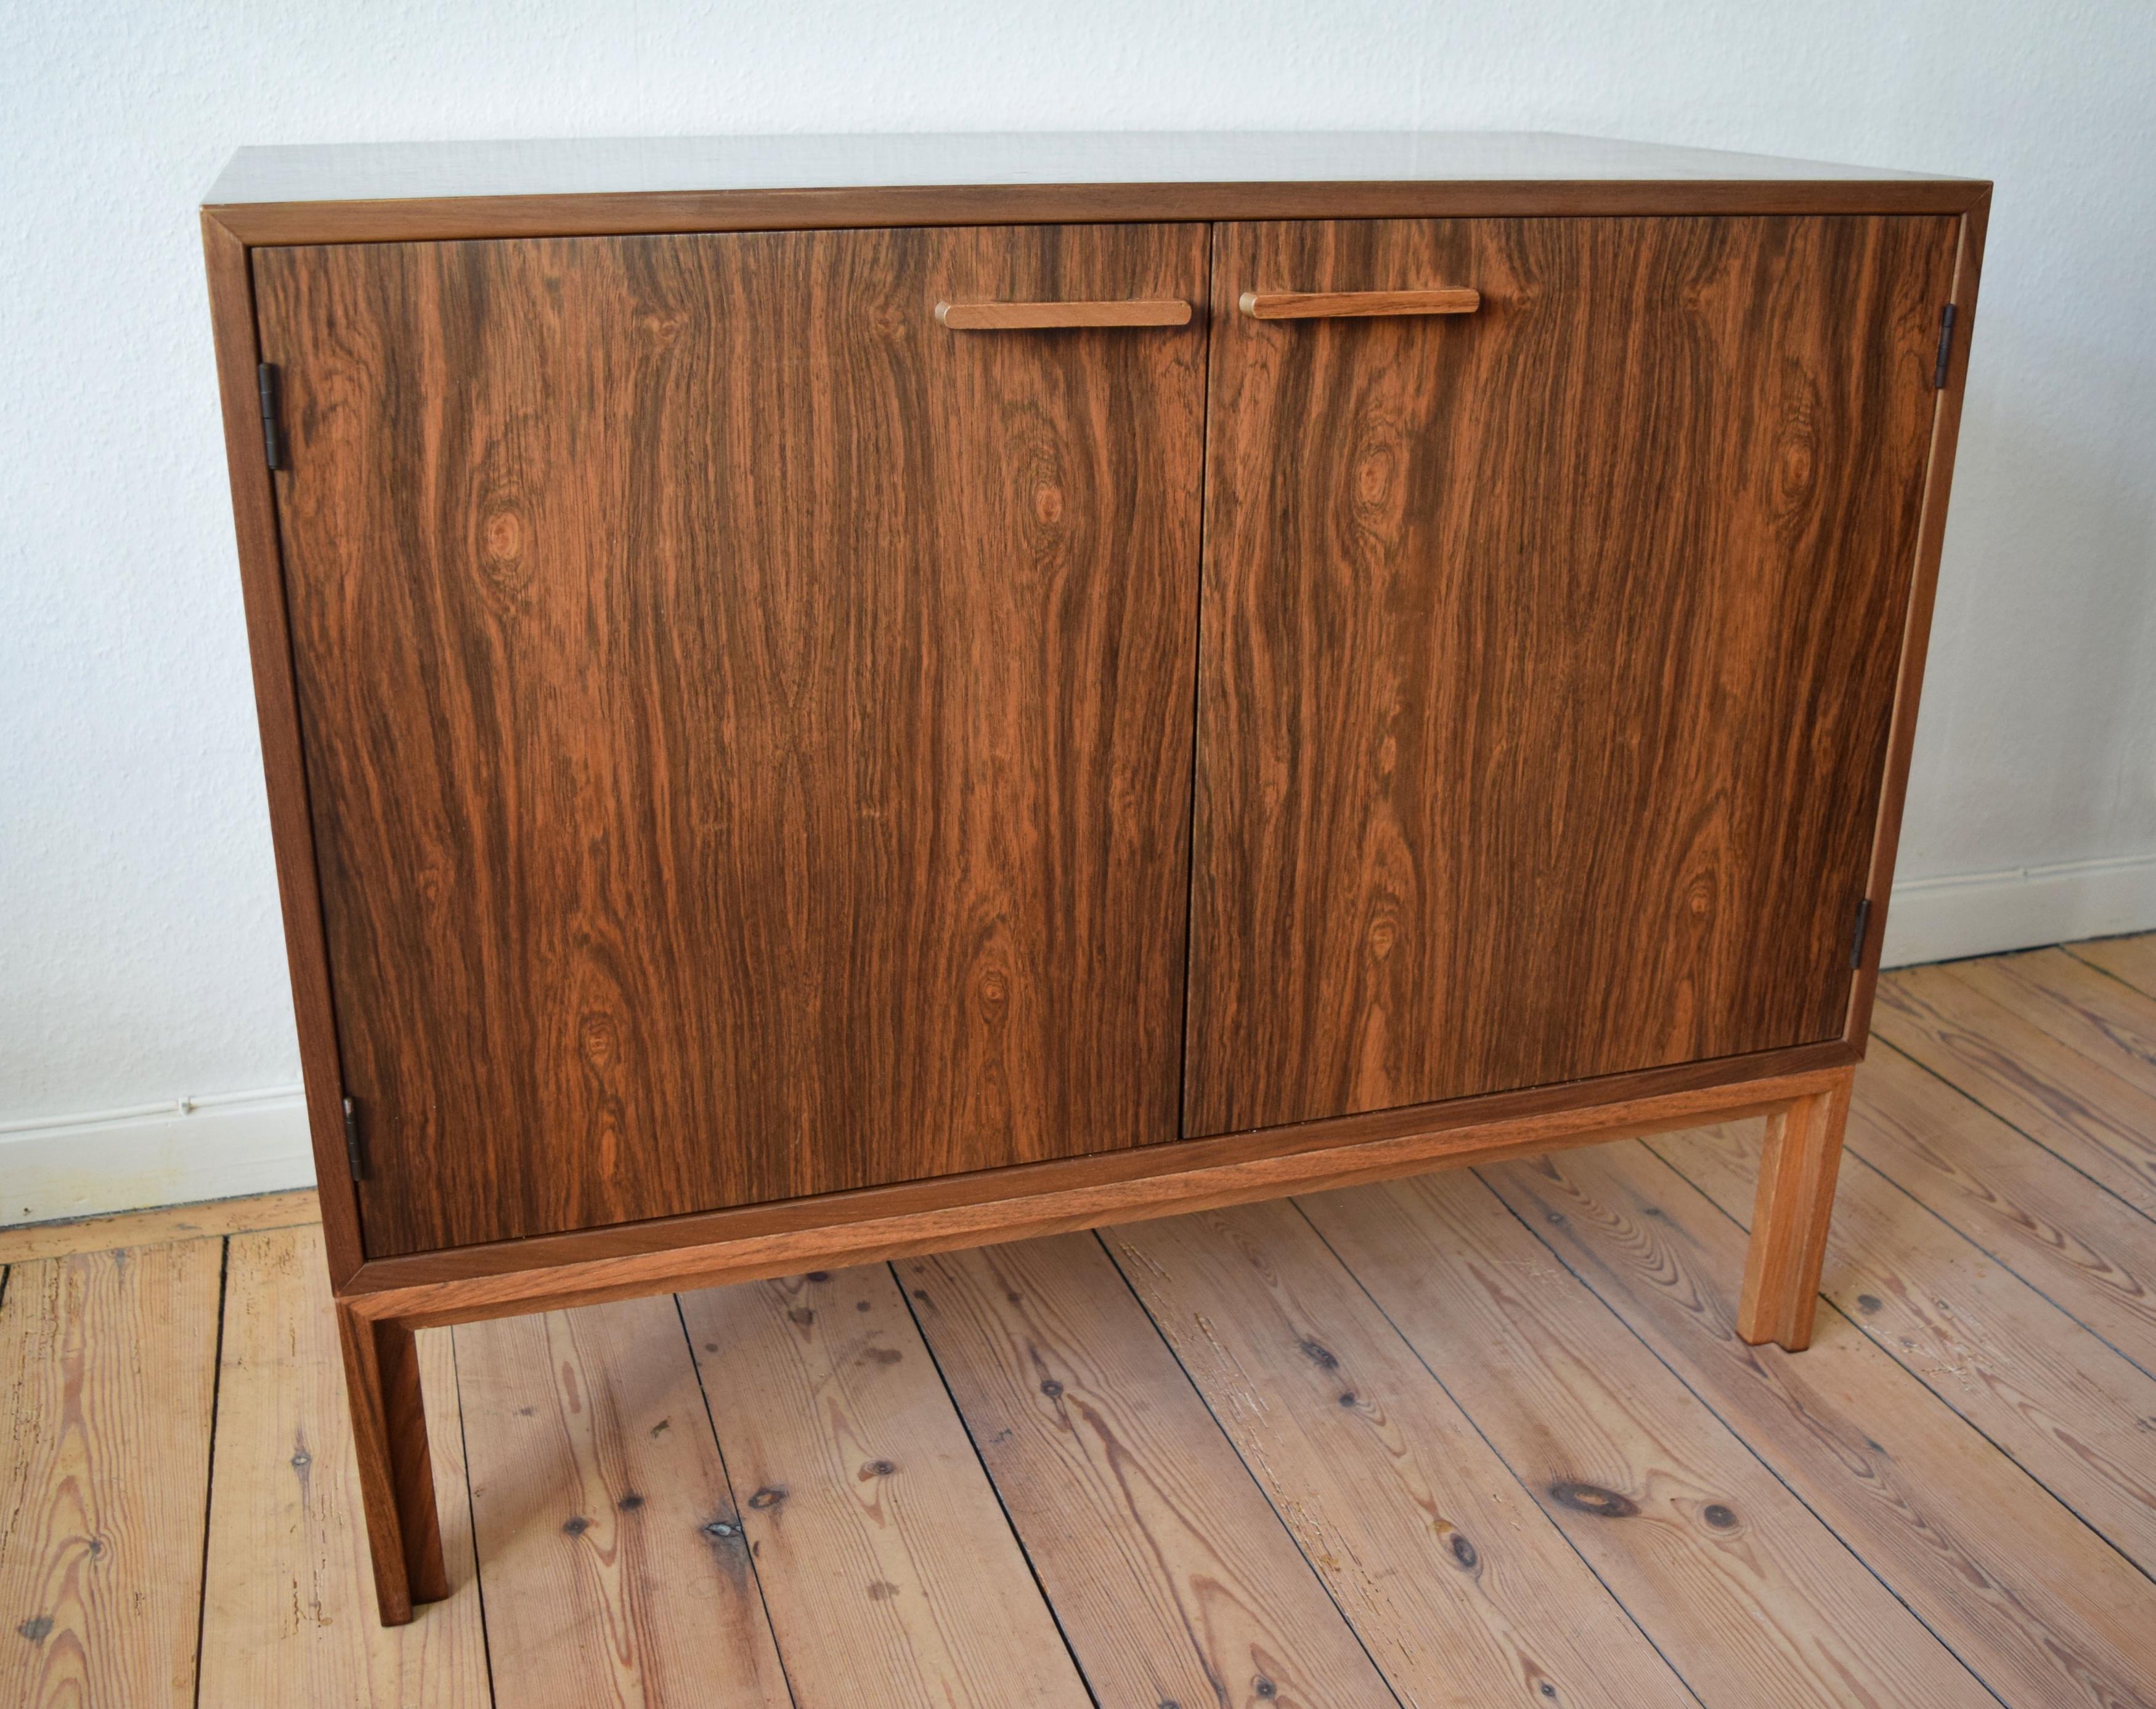 Danish rosewood cabinet by Kai Kristiansen for FM Møbler. Manufactured in the 1960s, this piece features two doors with adjustable internal shelf and felt-lined rosewood drawer. Sits on frame base solid rosewood legs. Striking rosewood grain inside